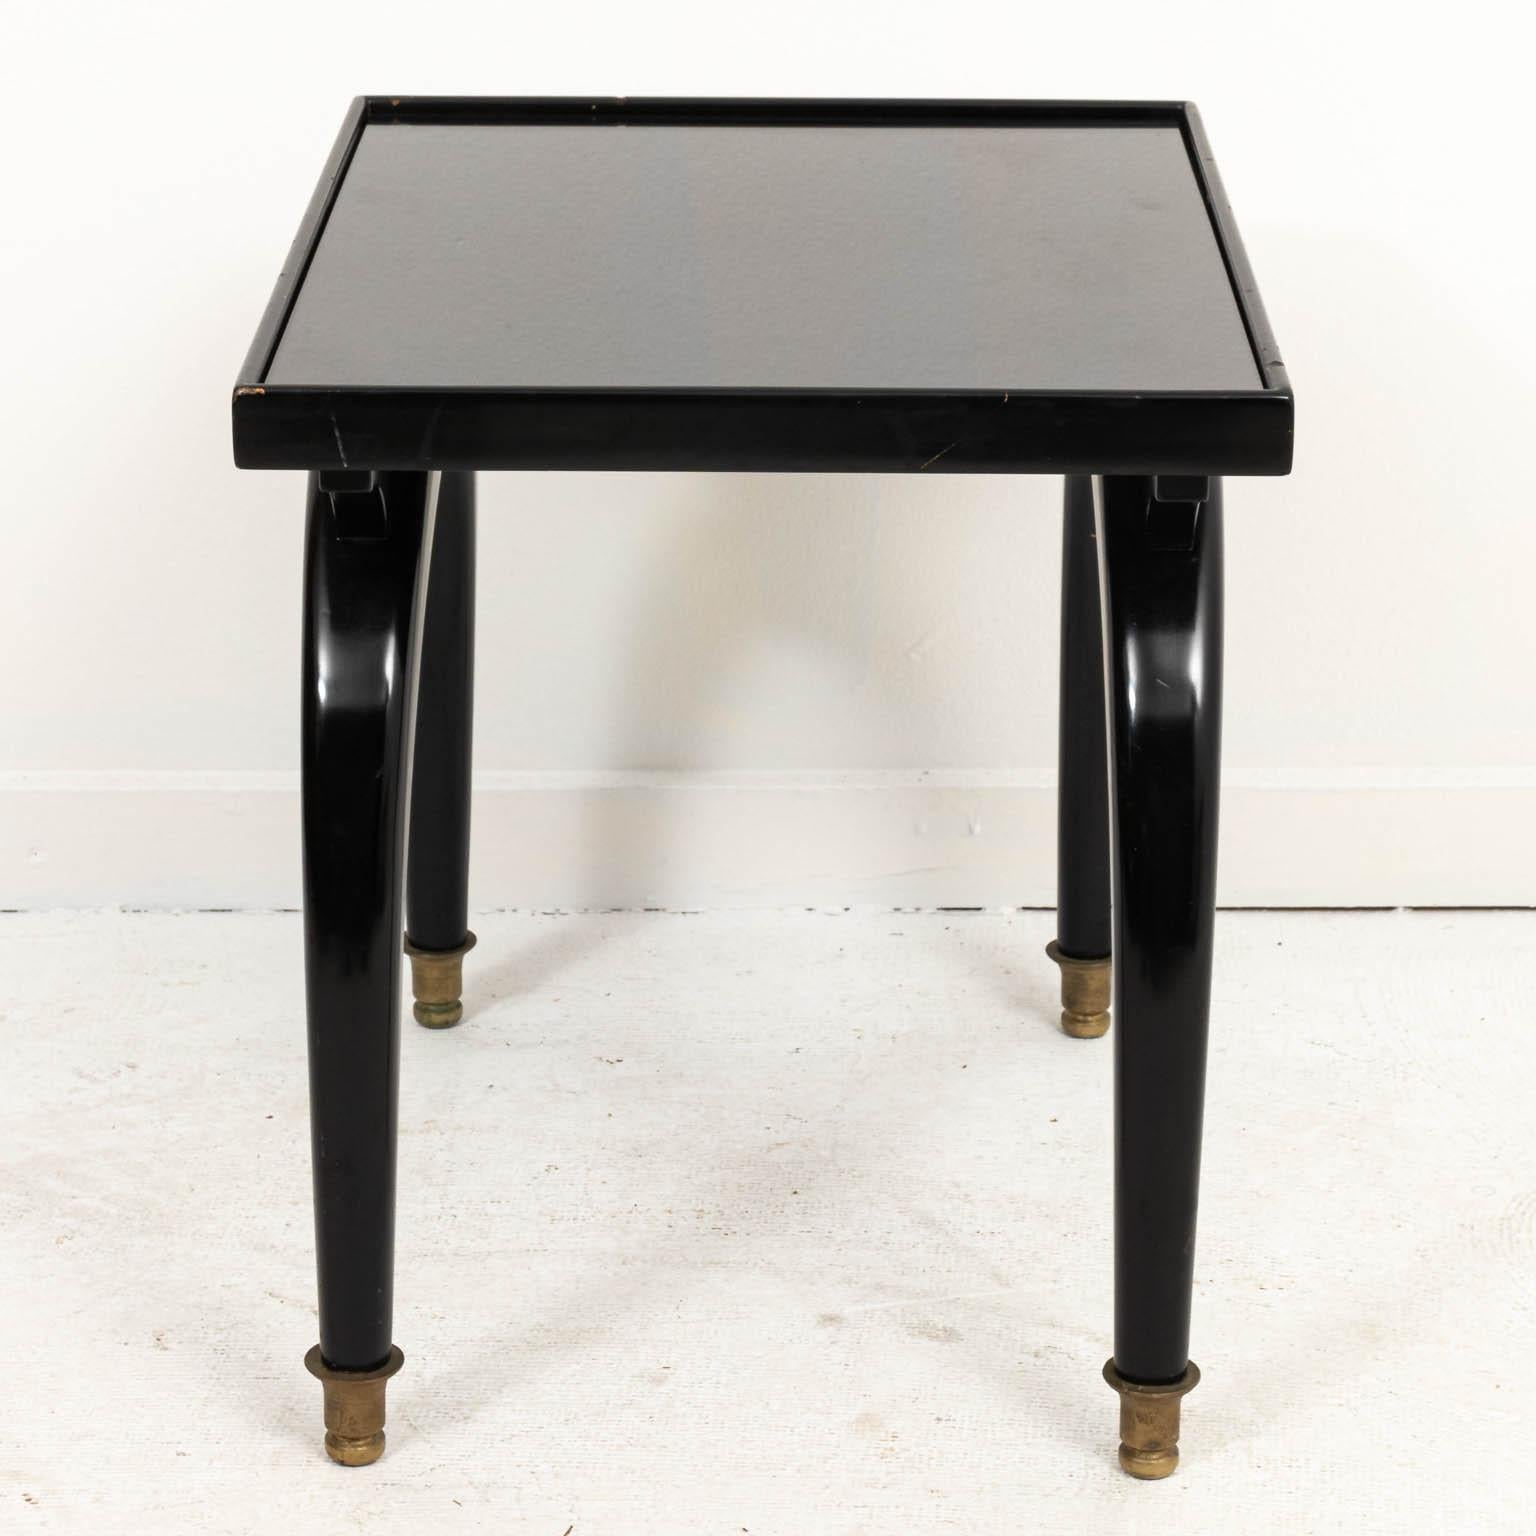 Pair of Art Deco Style Black Rectangular Side Tables with Glass Top 3